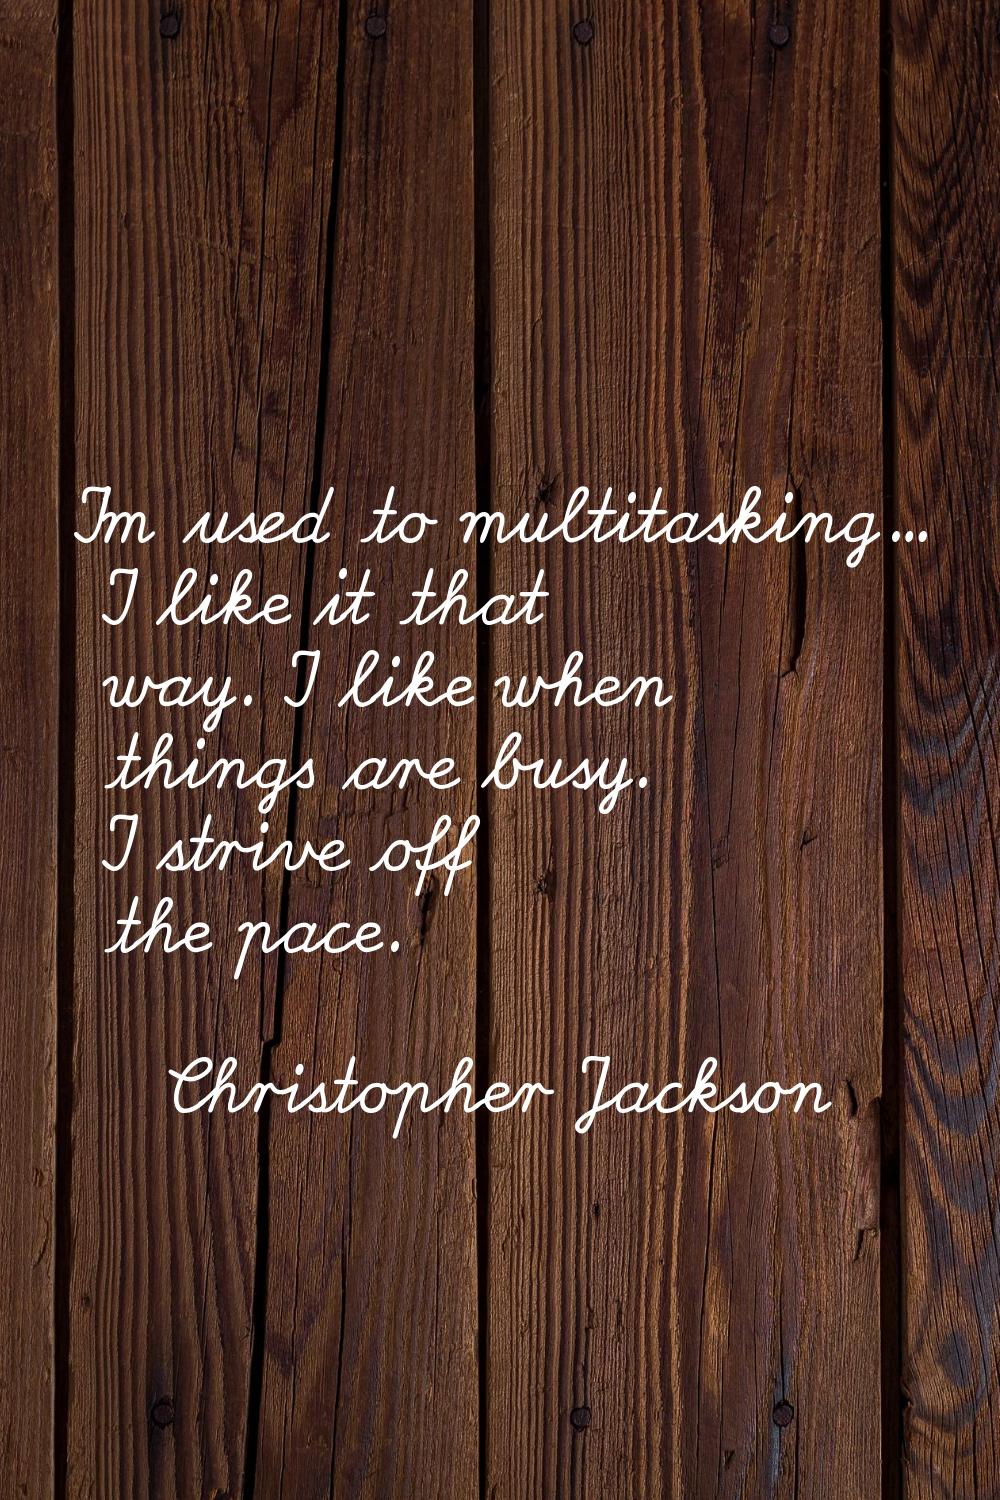 I'm used to multitasking... I like it that way. I like when things are busy. I strive off the pace.